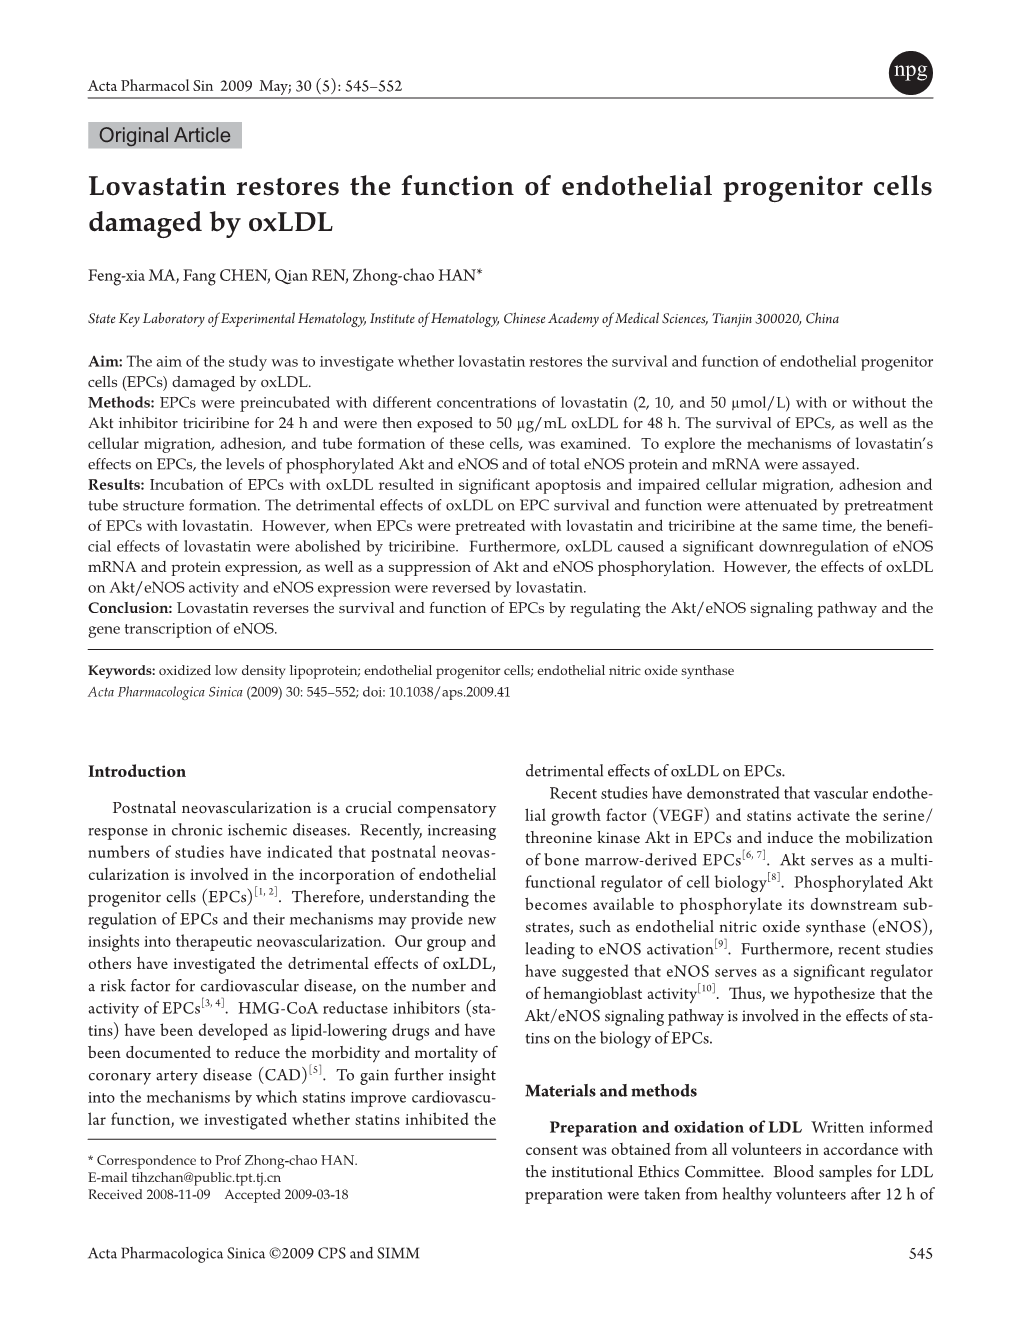 Lovastatin Restores the Function of Endothelial Progenitor Cells Damaged by Oxldl